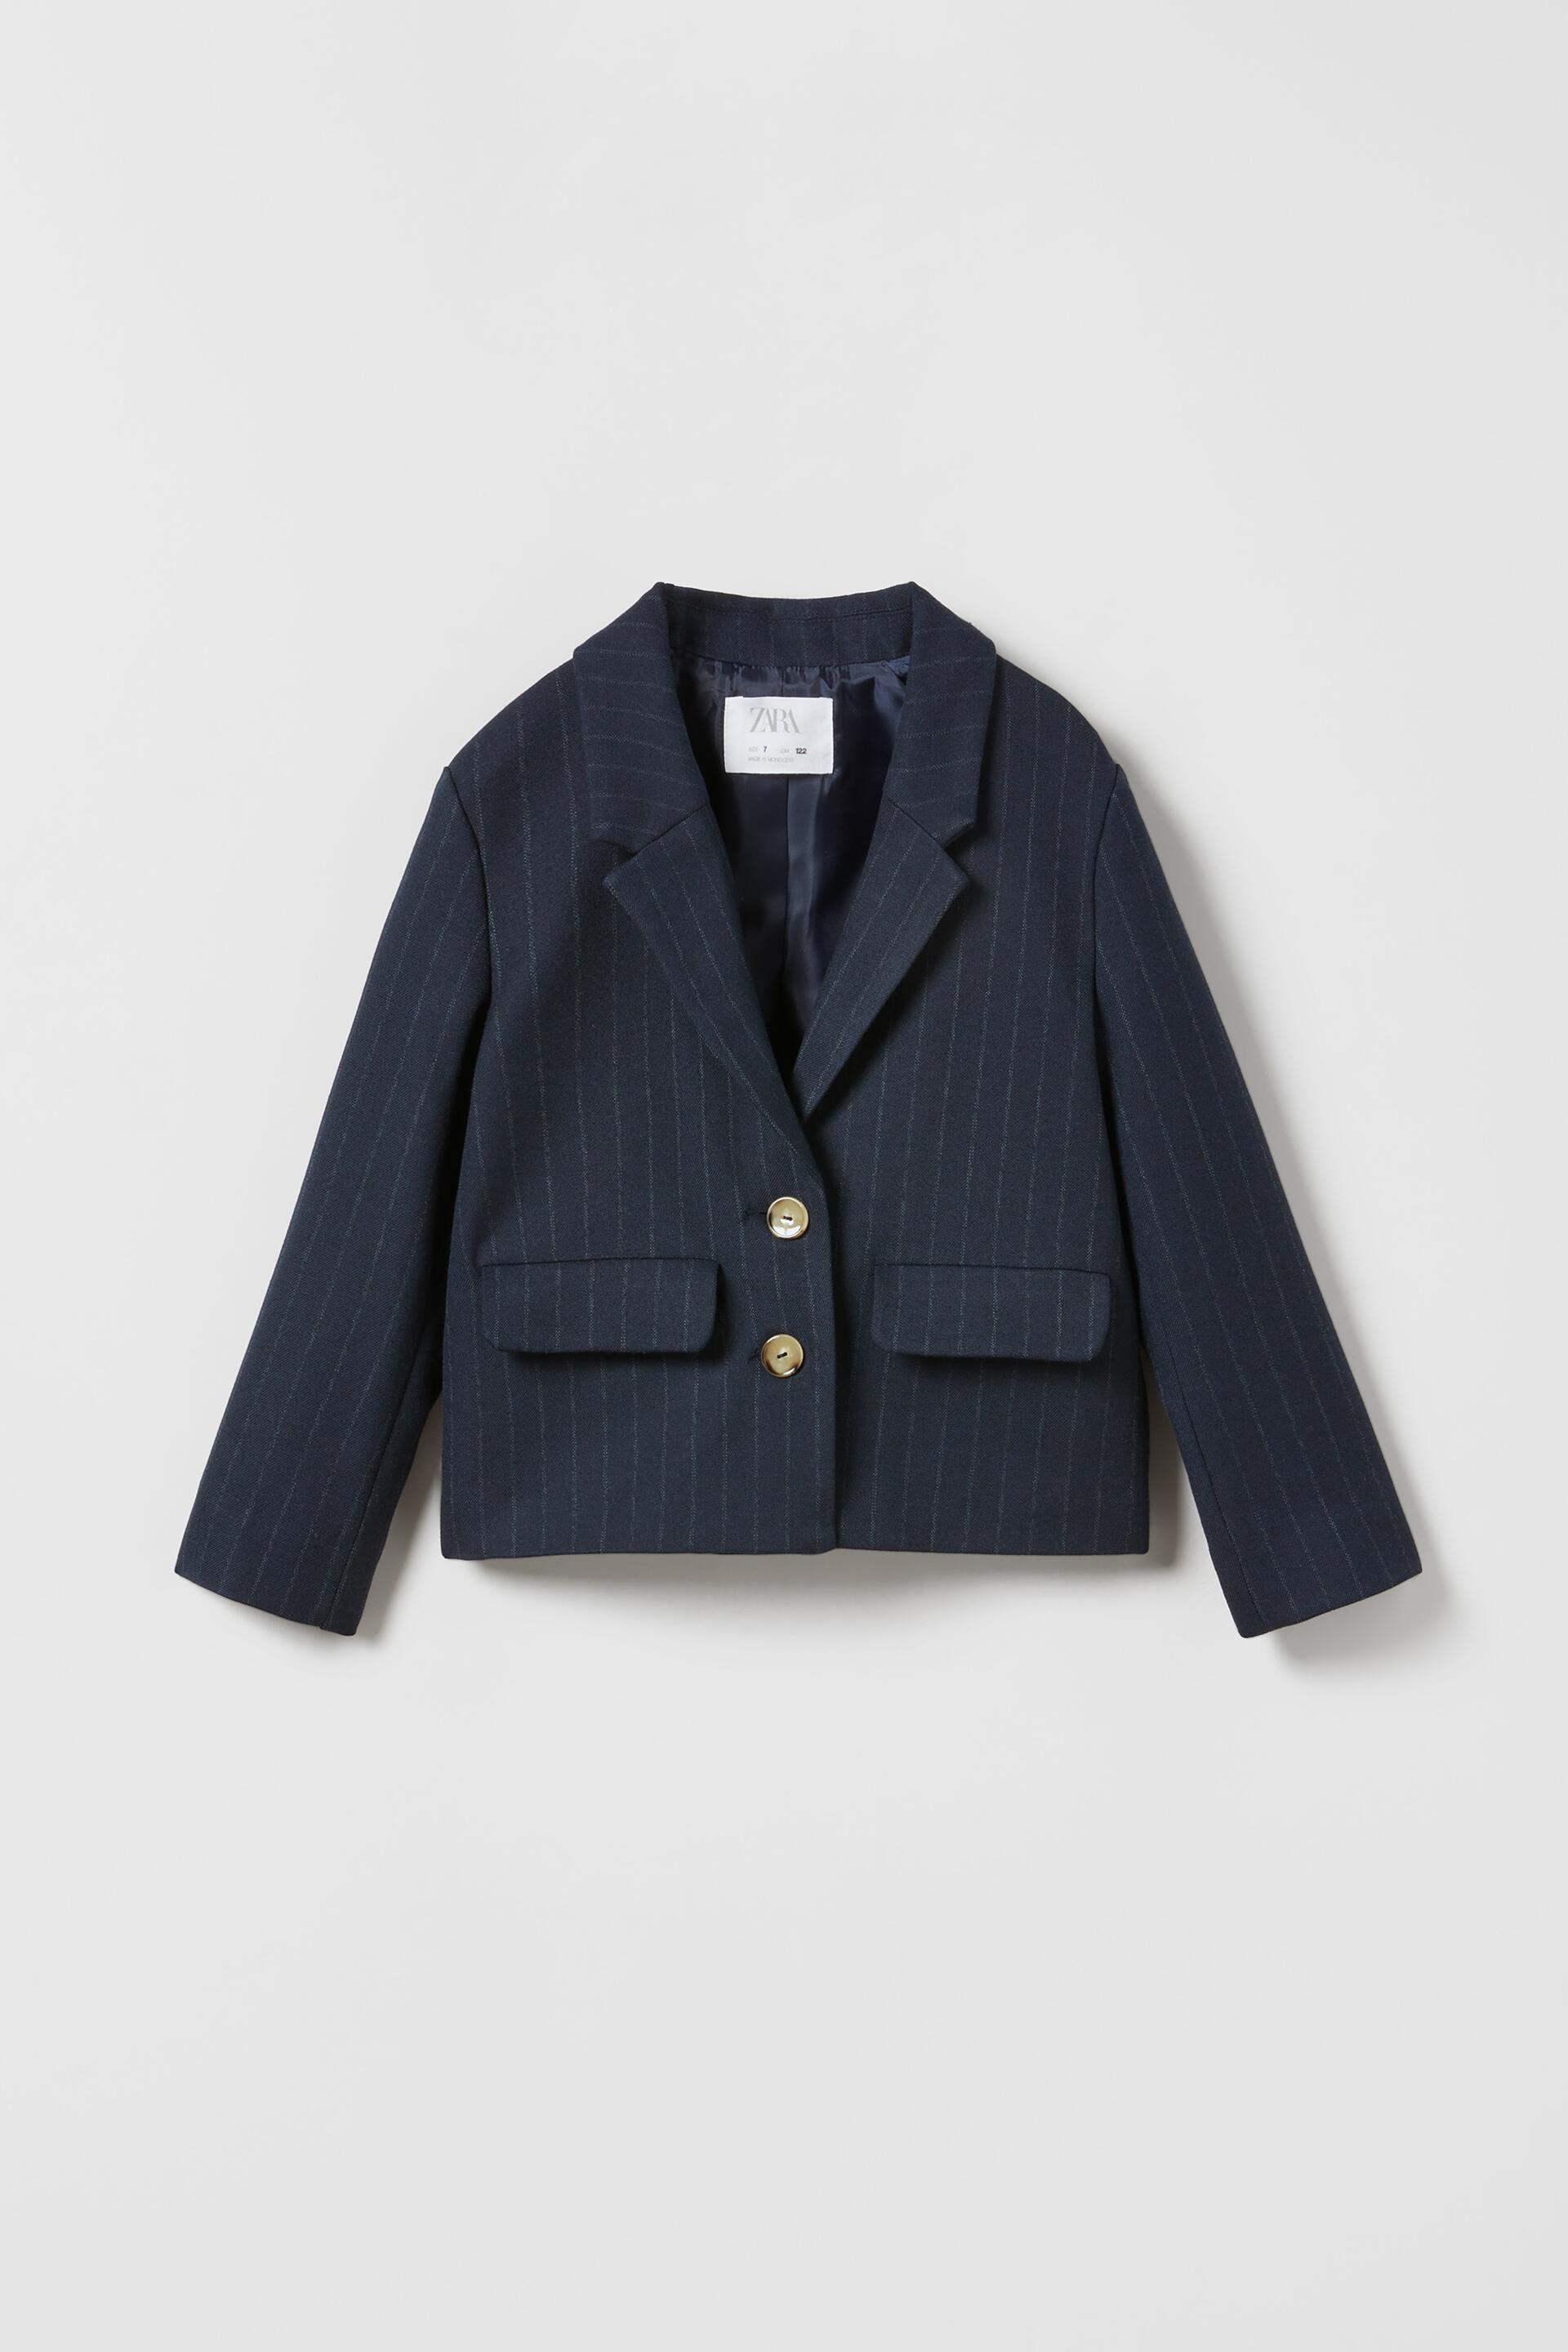 Blazer with lapel collar and long sleeves. Front button closure. Front flap pockets. ZARA